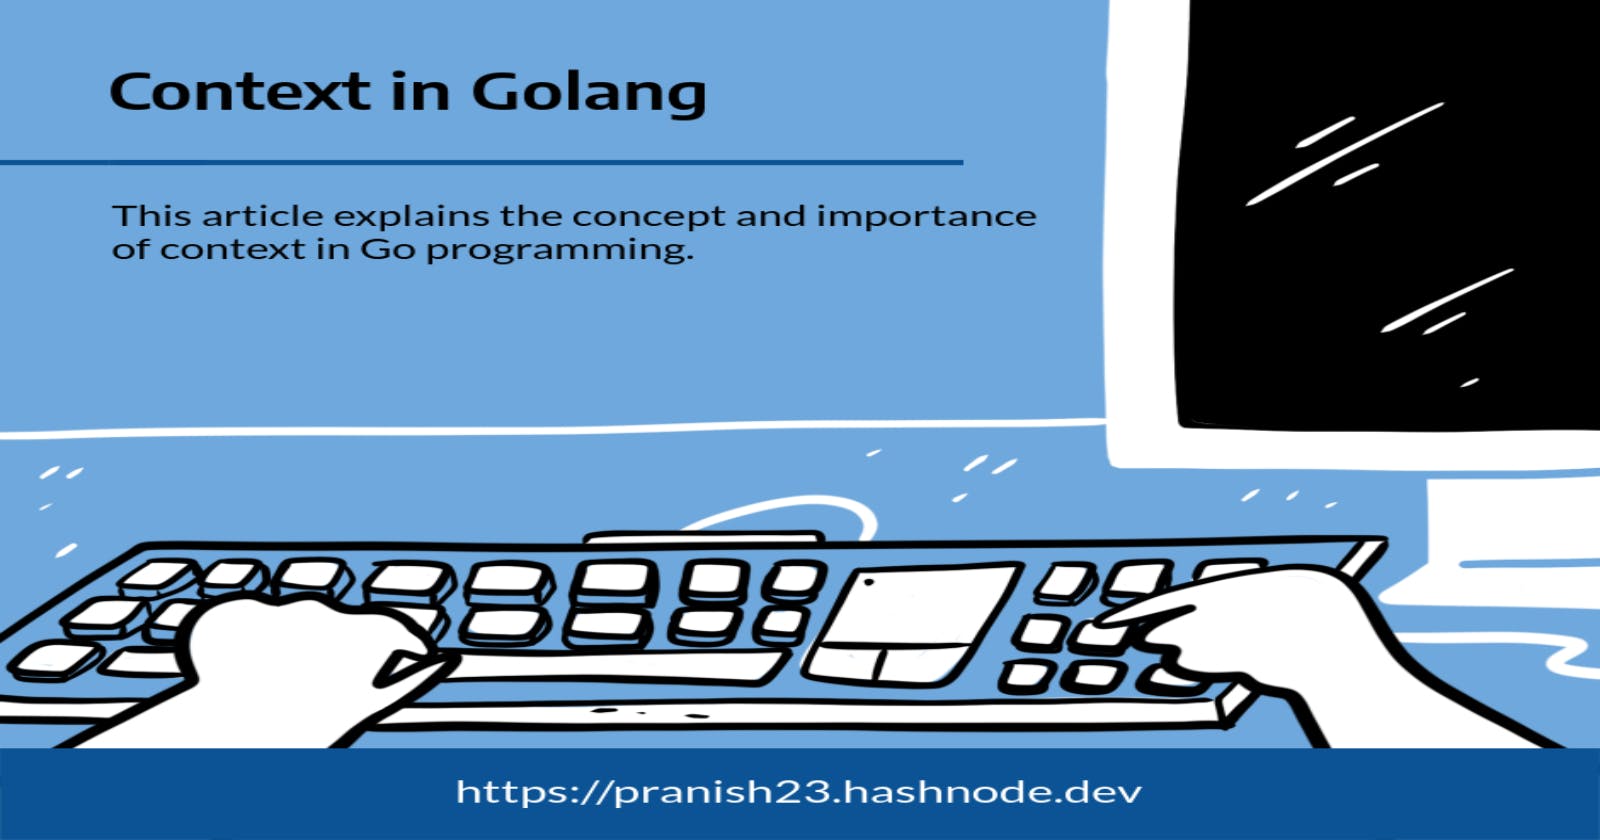 What is context in Golang?